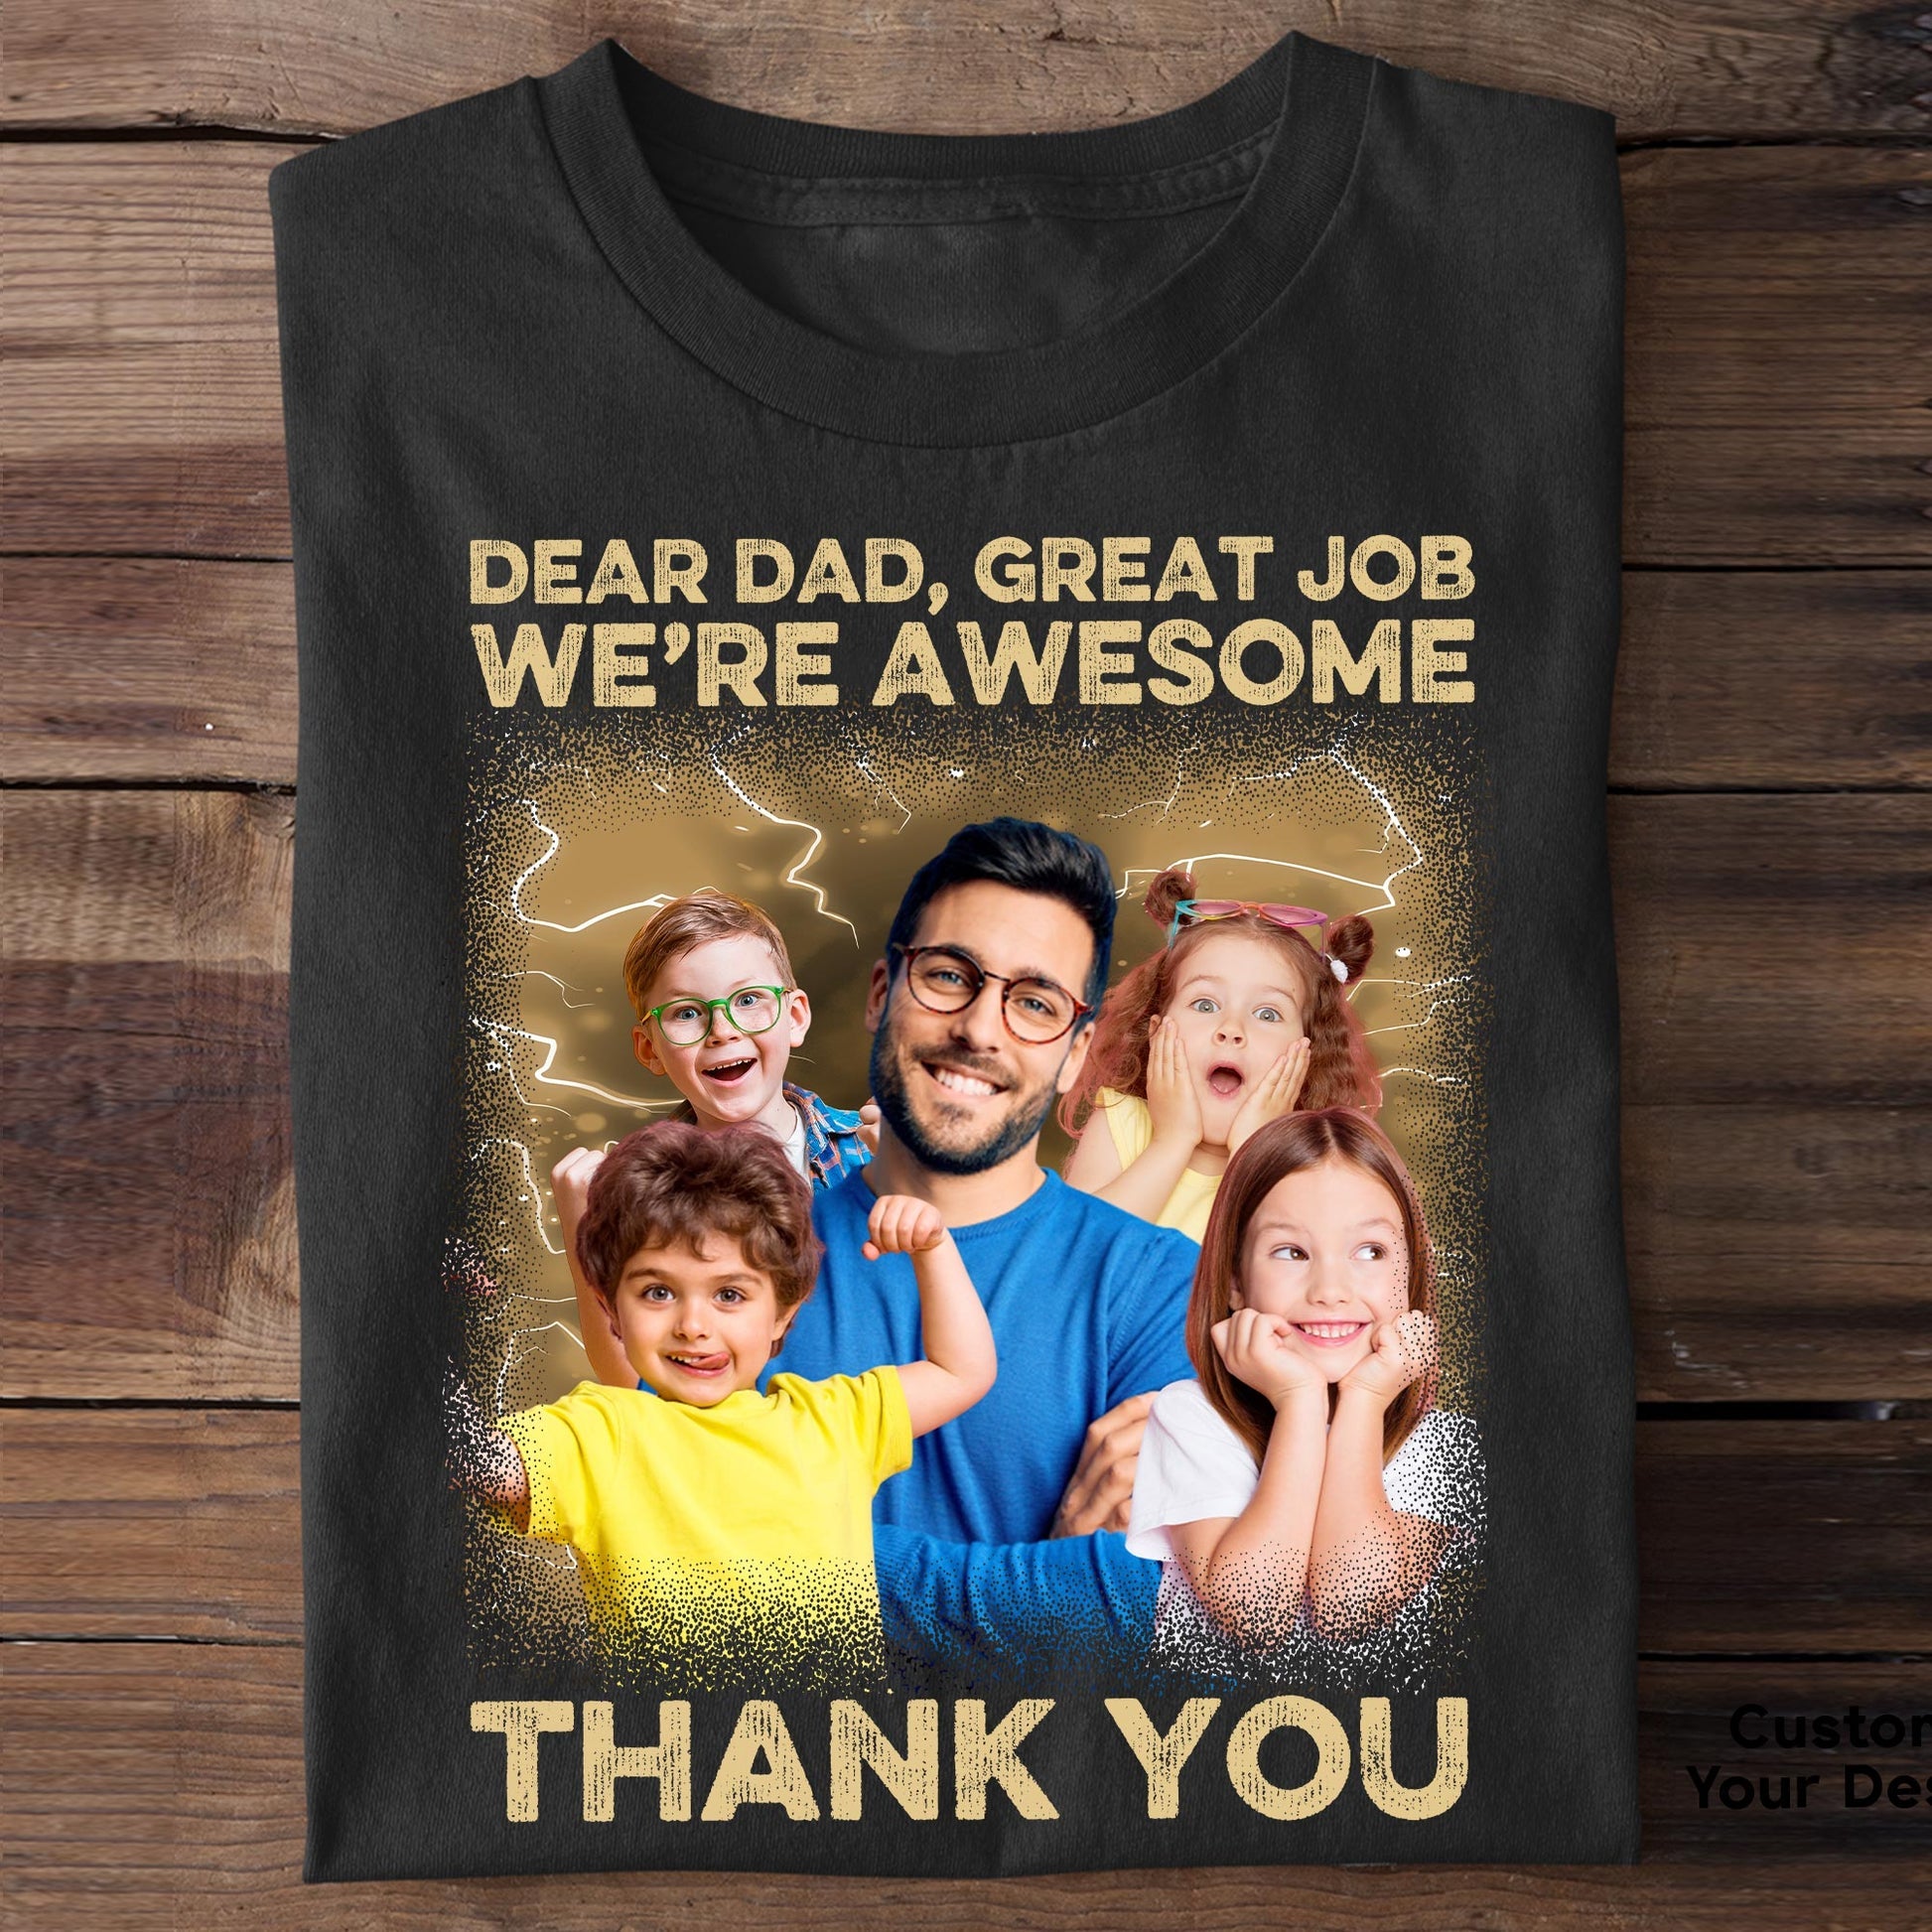 Great Job We're Awesome Vintage Bootleg Tee - Personalized Photo Shirt